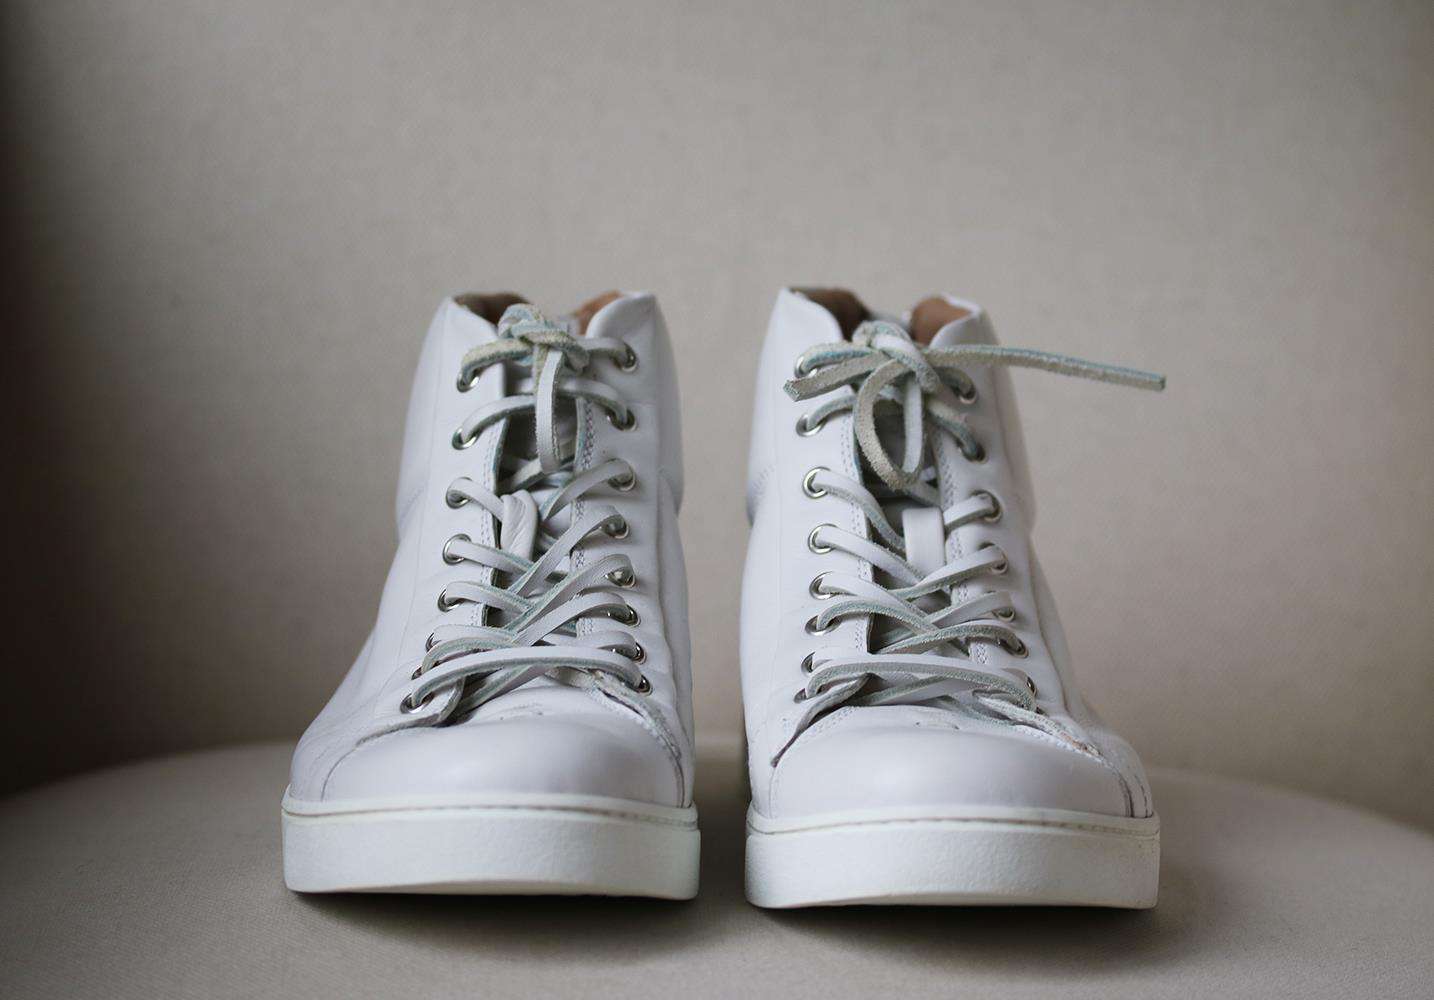 GIANVITO ROSSI LEATHER HIGH TOP SNEAKERS EU 42 UK 8 US 9